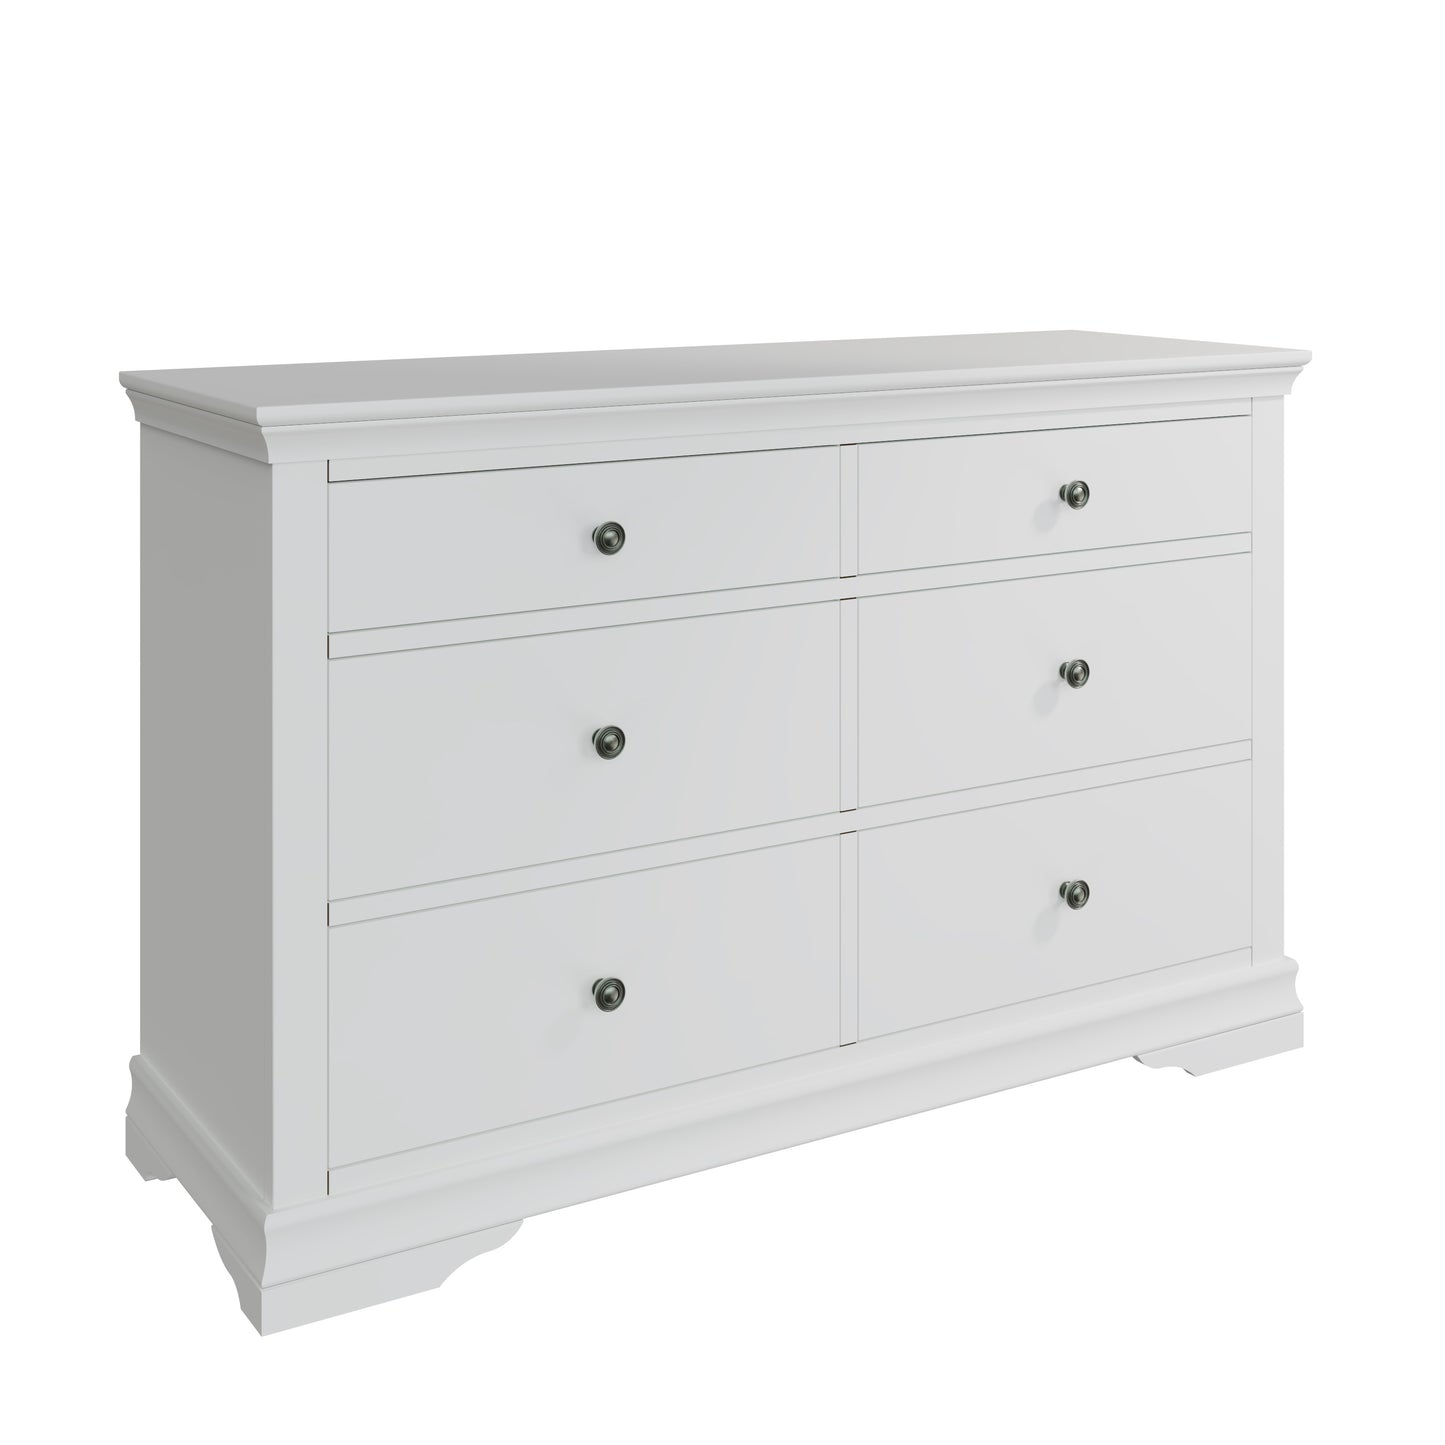 Toulouse White Chest Of Drawers - 6 Drawer Chest